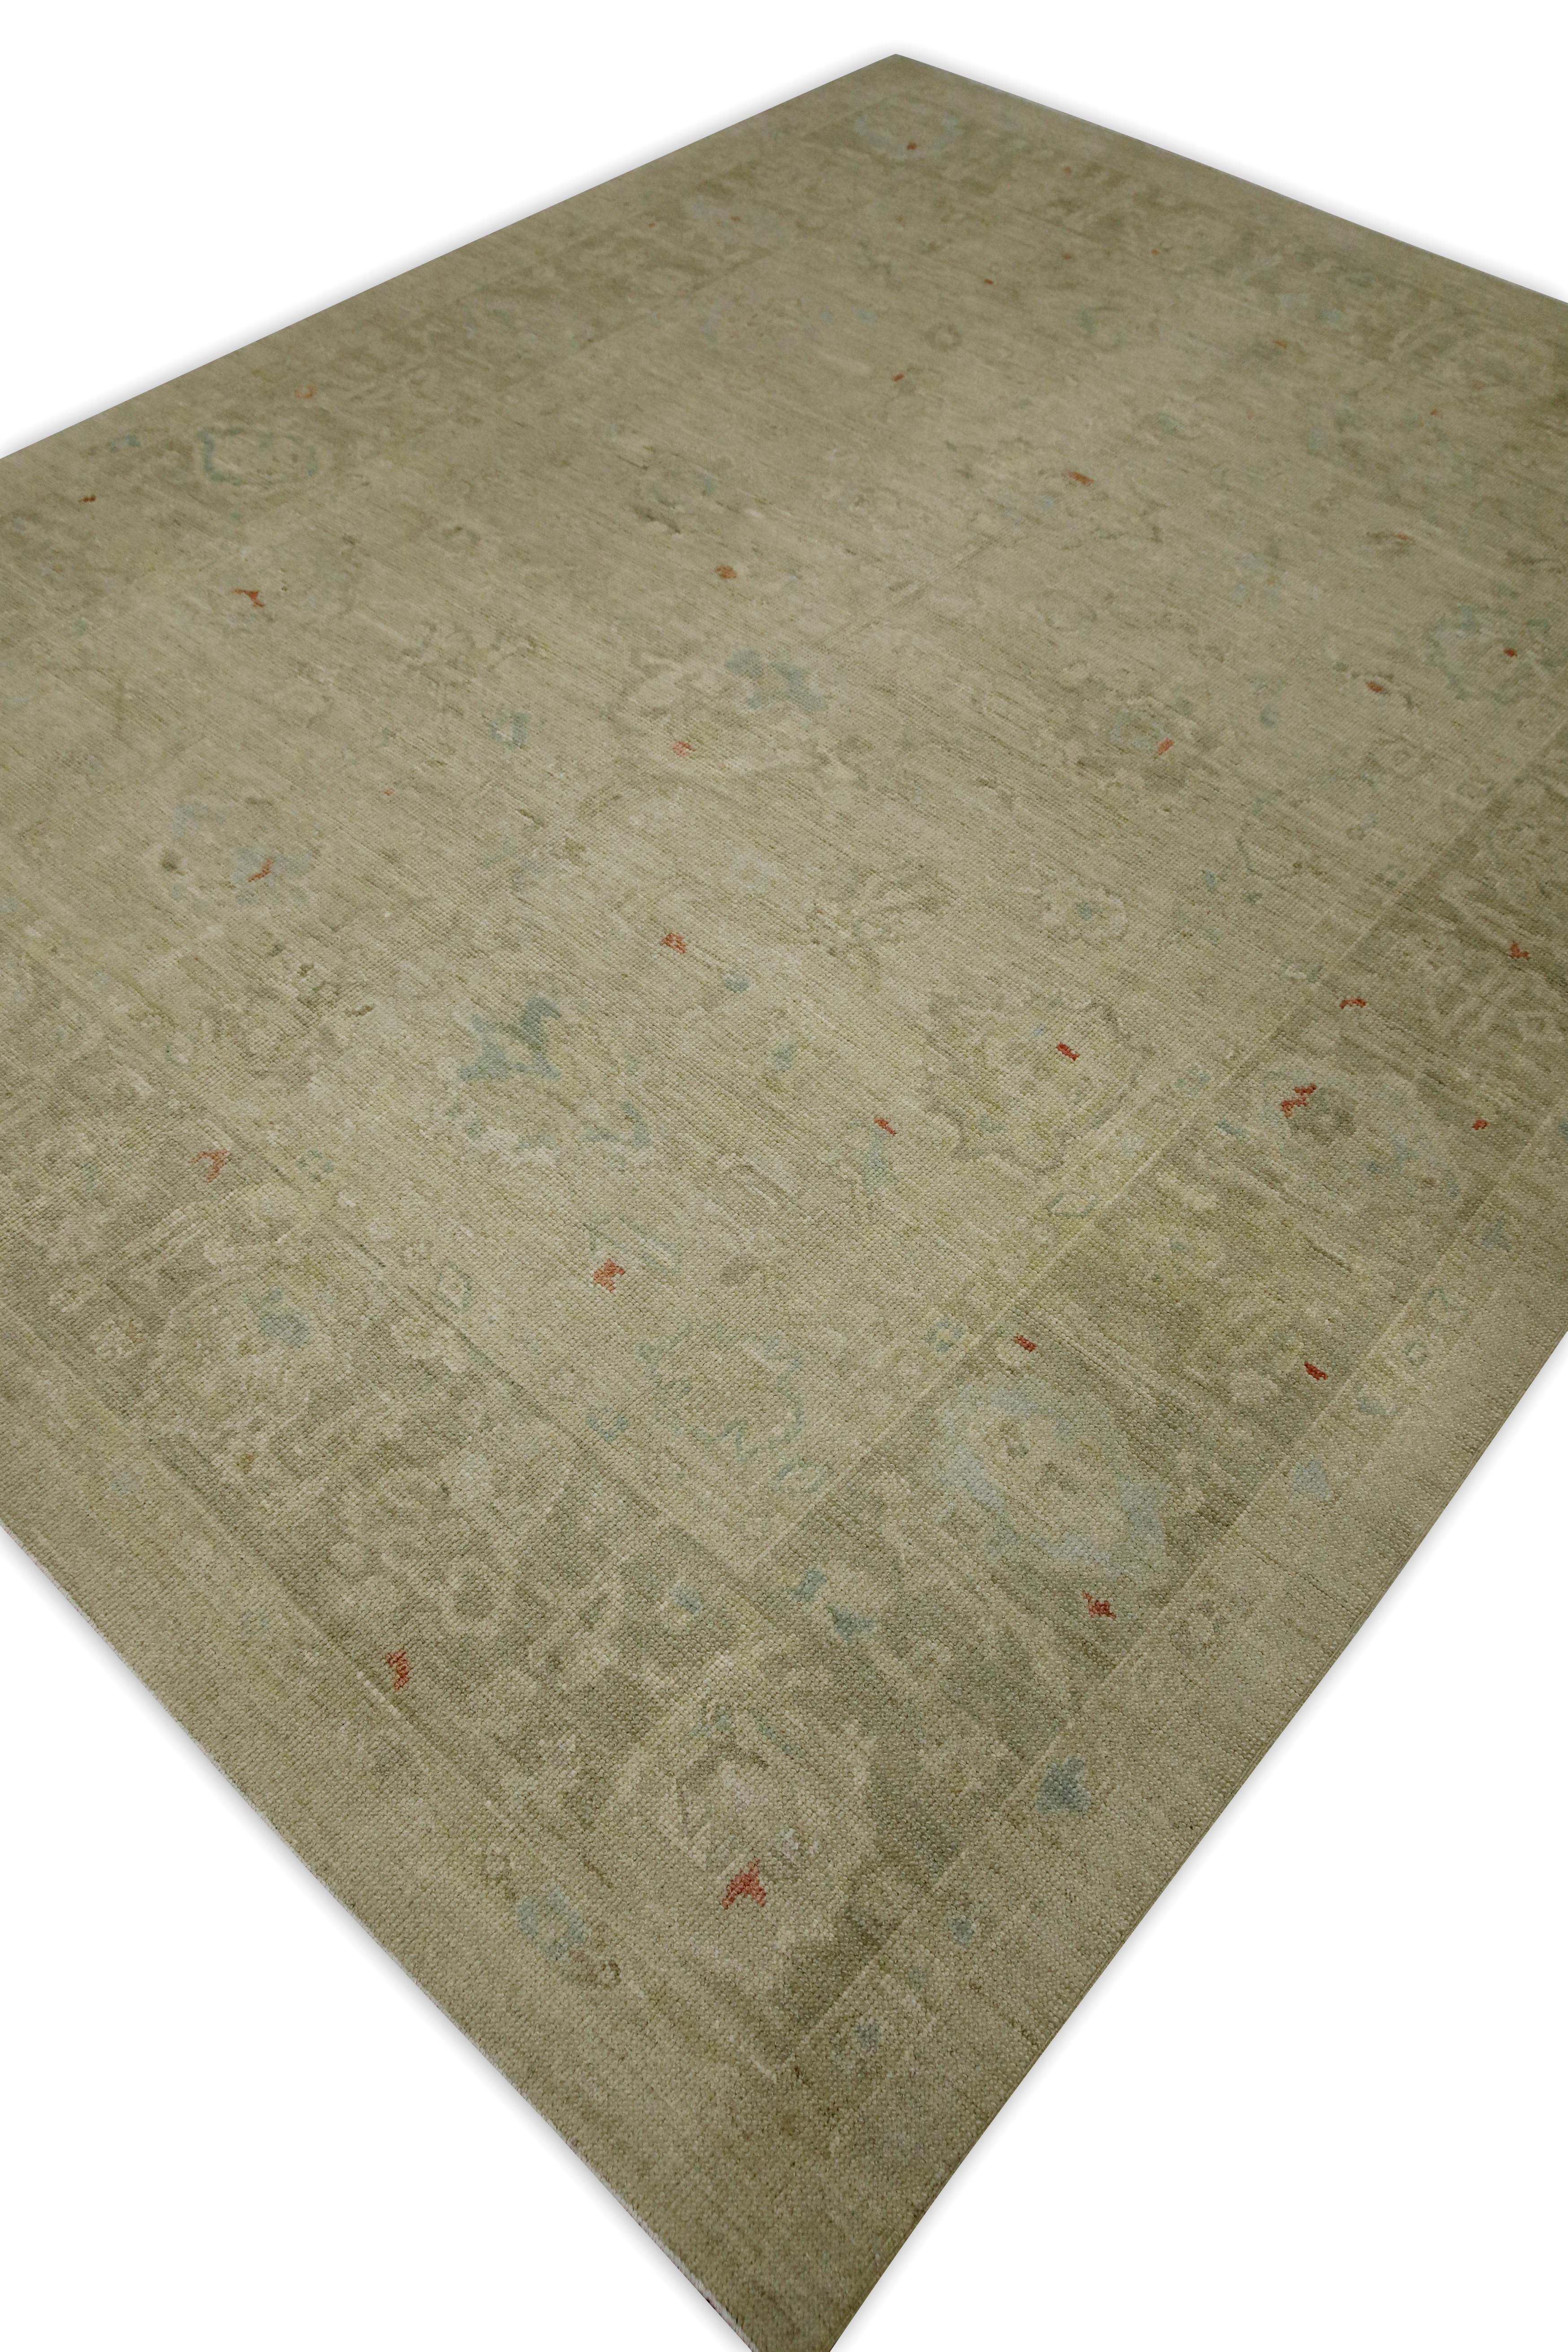 Contemporary Beige Handwoven Wool Turkish Oushak Rug 8' x 10' For Sale